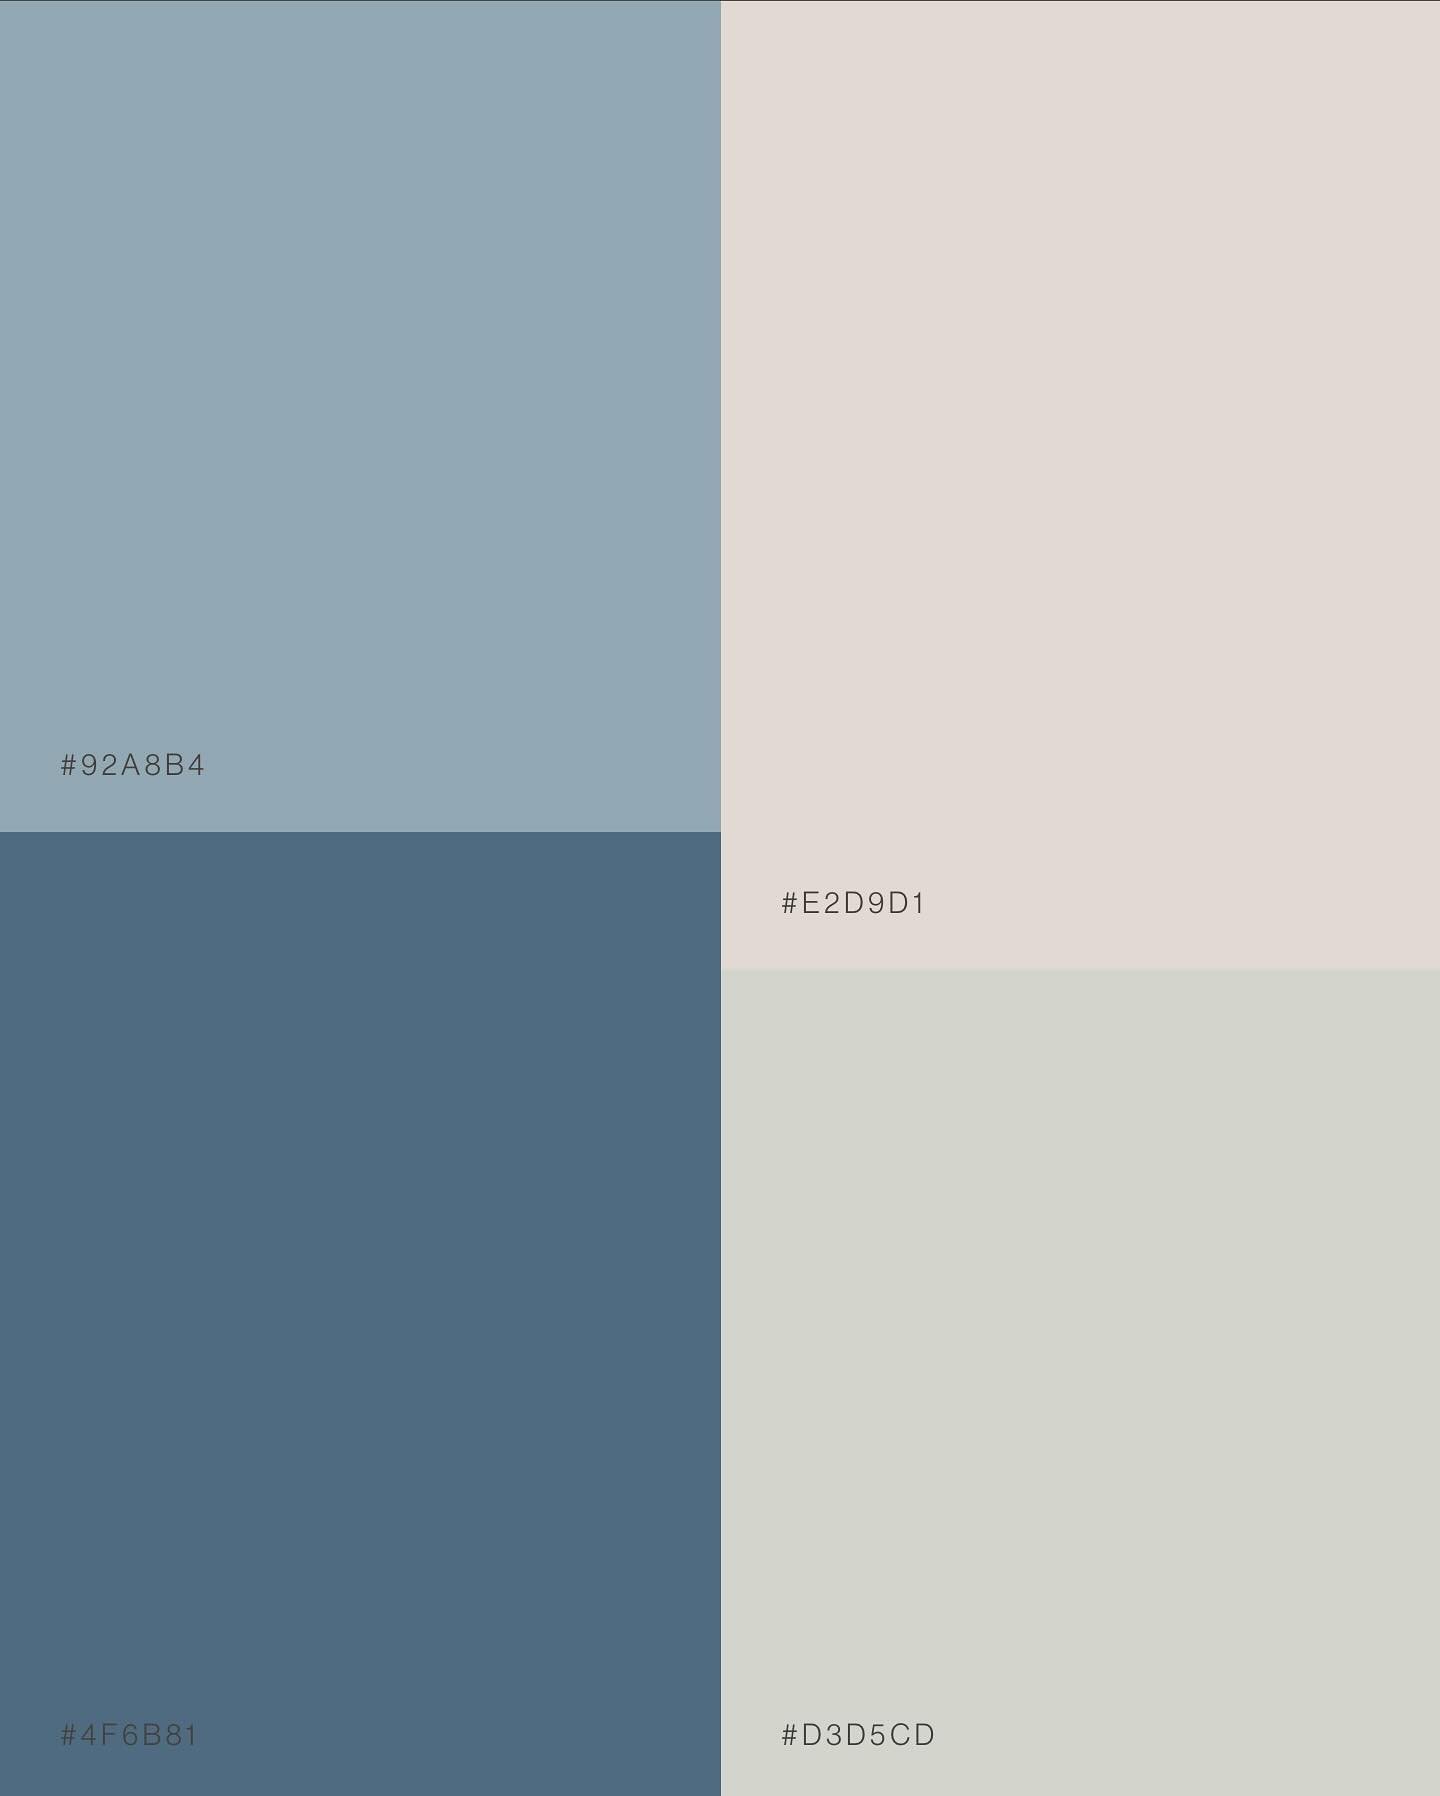 The May Color Palette ✨ Color palettes can be used in various ways to bring out voice and emotion. This palette is flexible to a calm or bold representation - which color would you lean into?
&bull;
&bull;
&bull;
#colorpaletteinspiration #branddesign